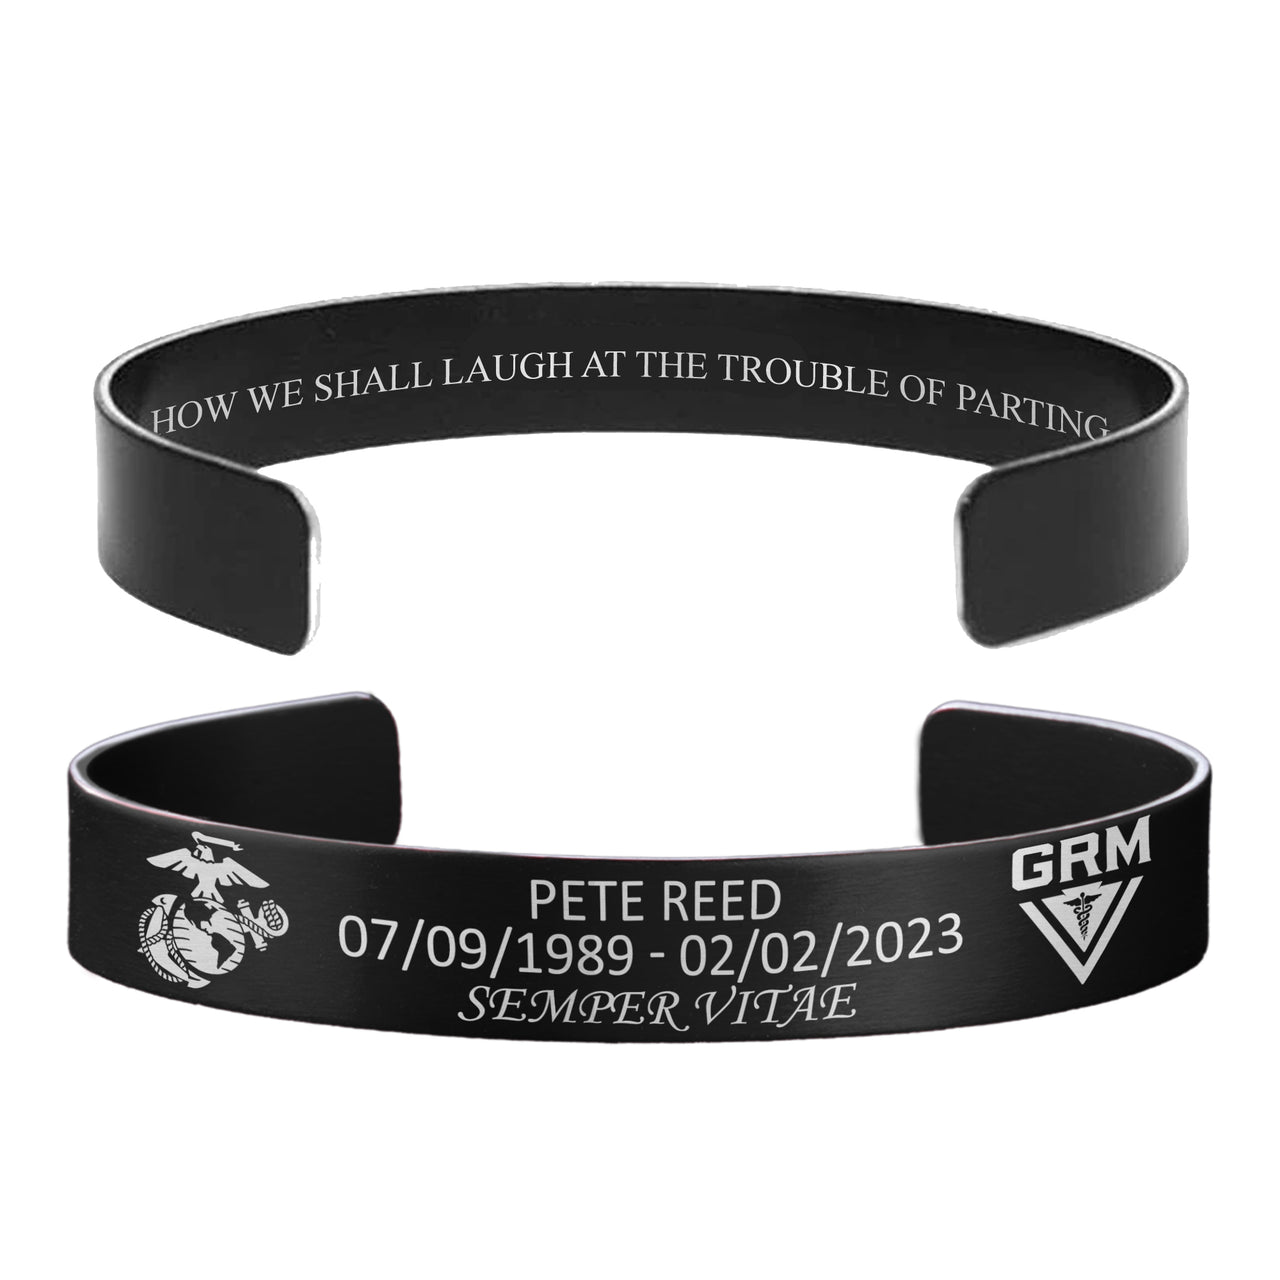 Pete Reed Memorial Band – Hosted by the Reed Family